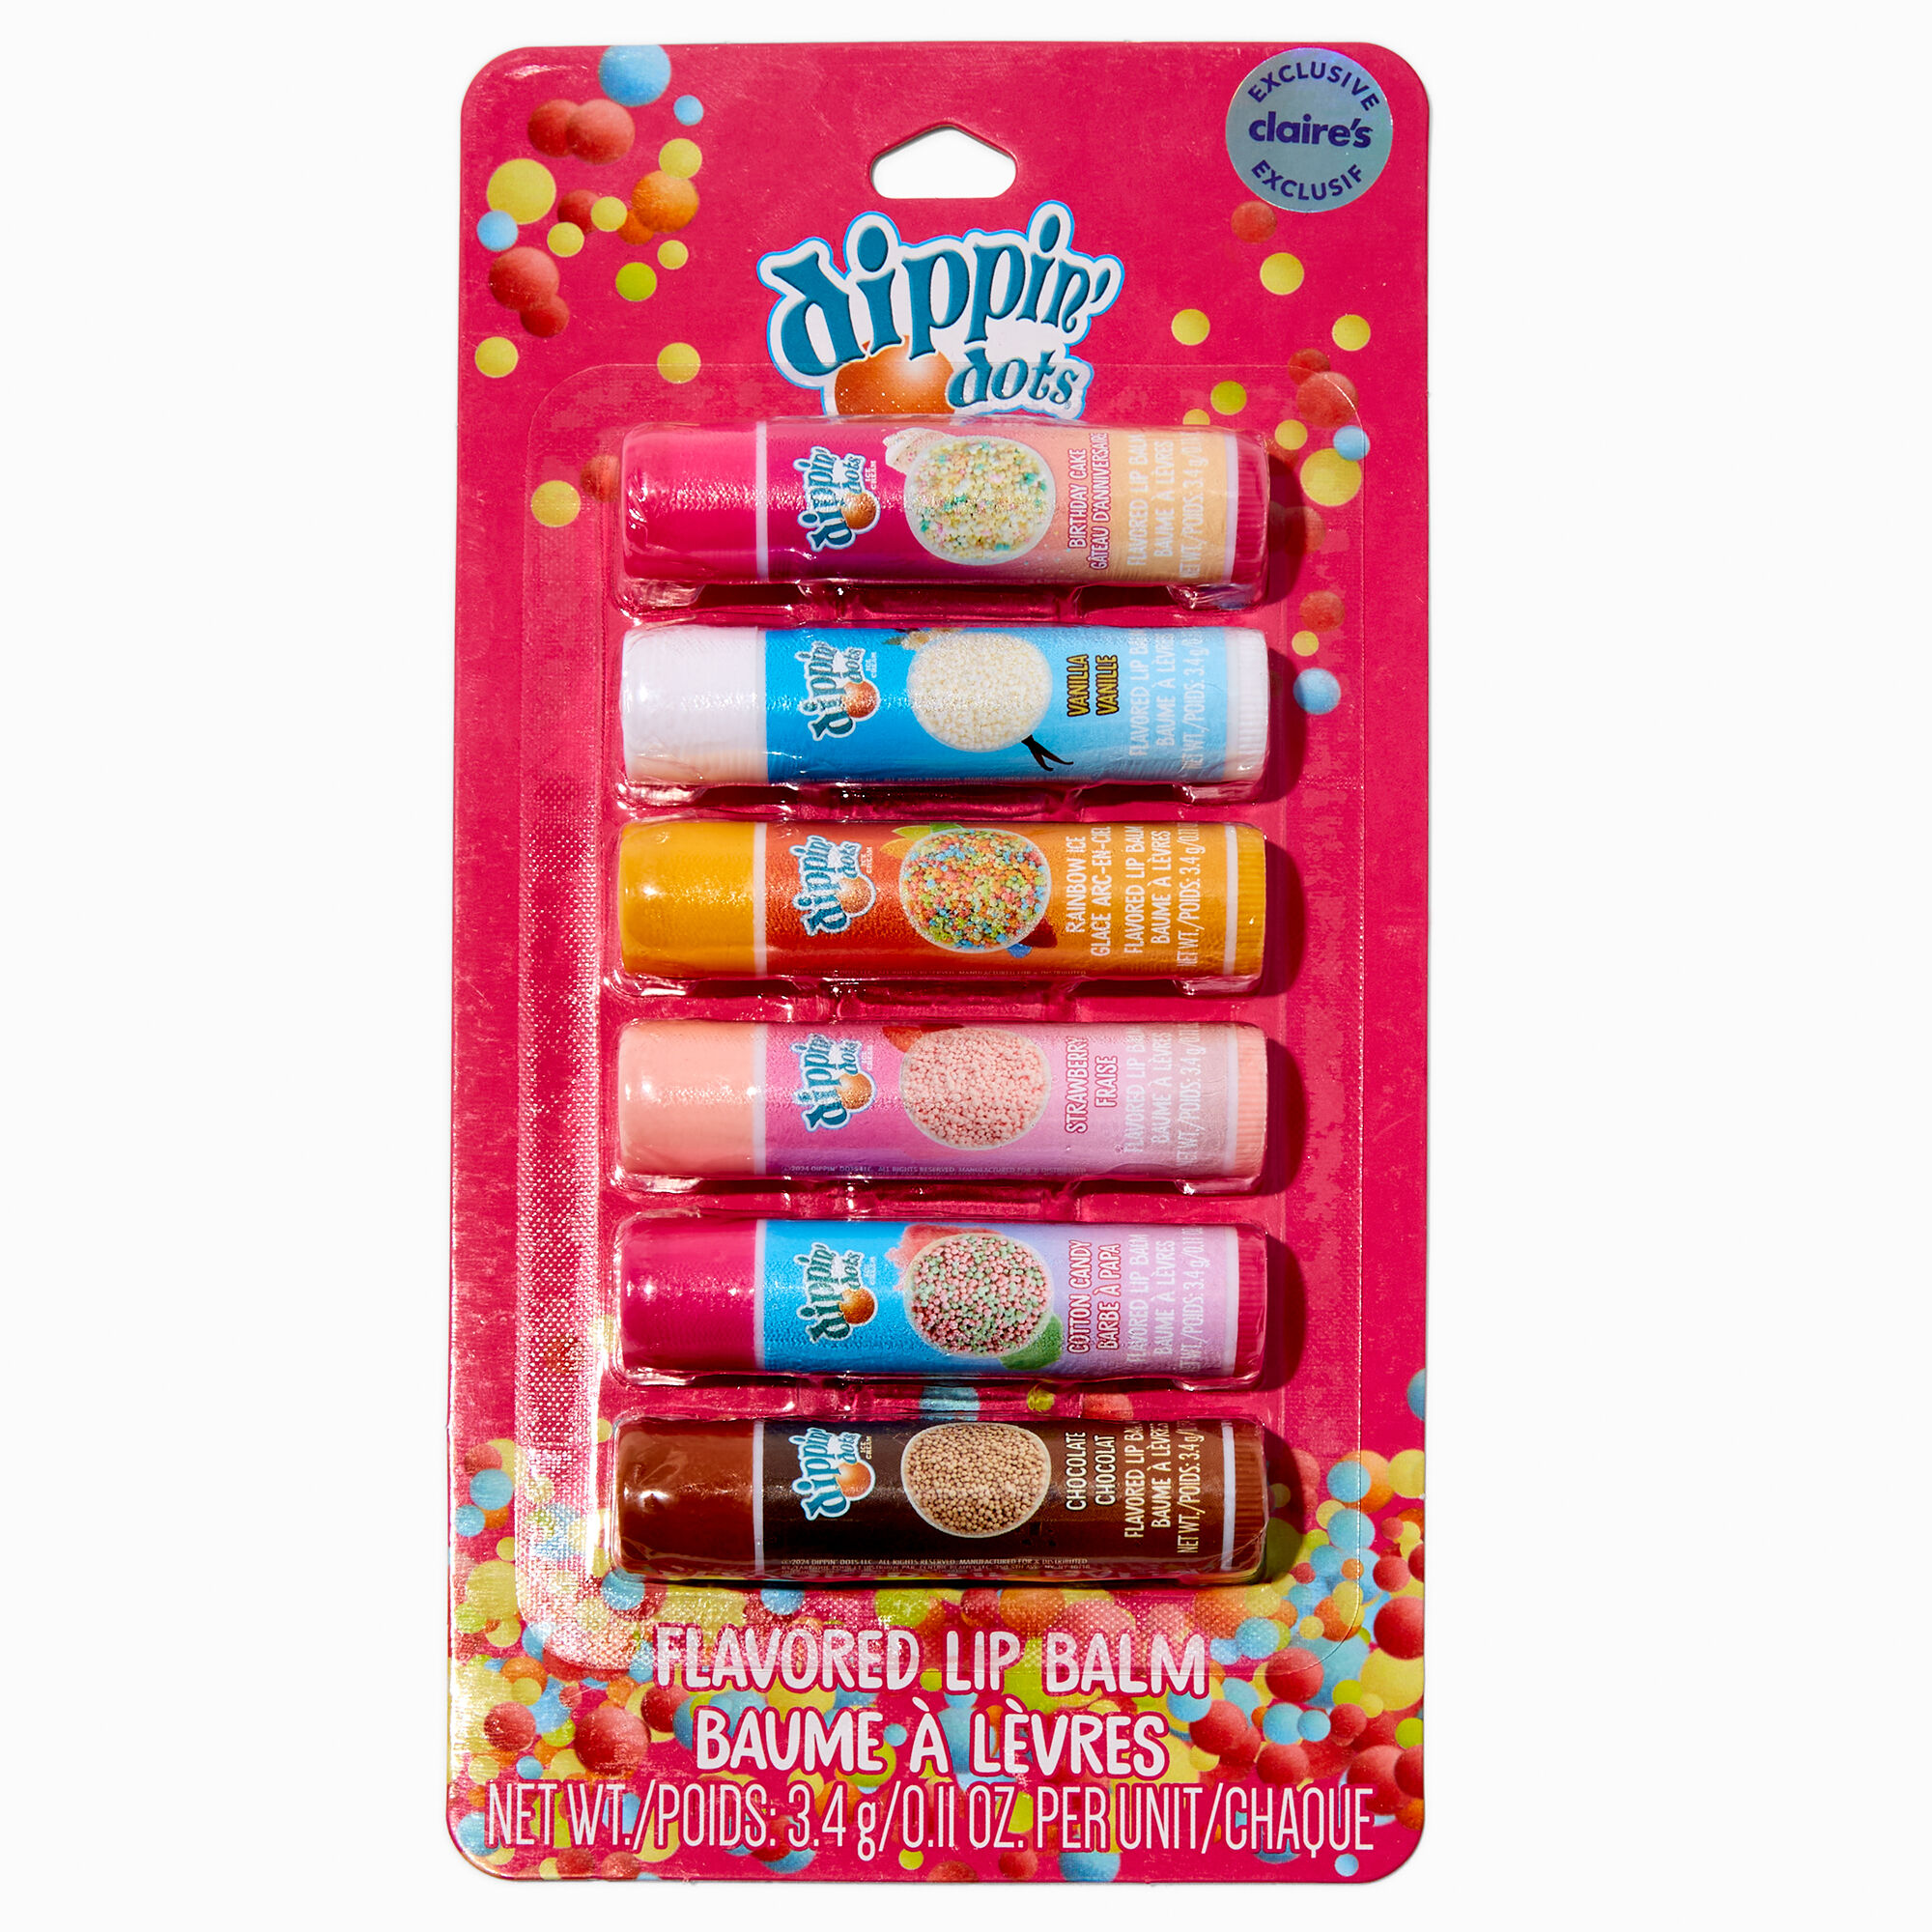 View Dippin Dots Claires Exclusive Flavored Lip Balm Set 6 Pack information